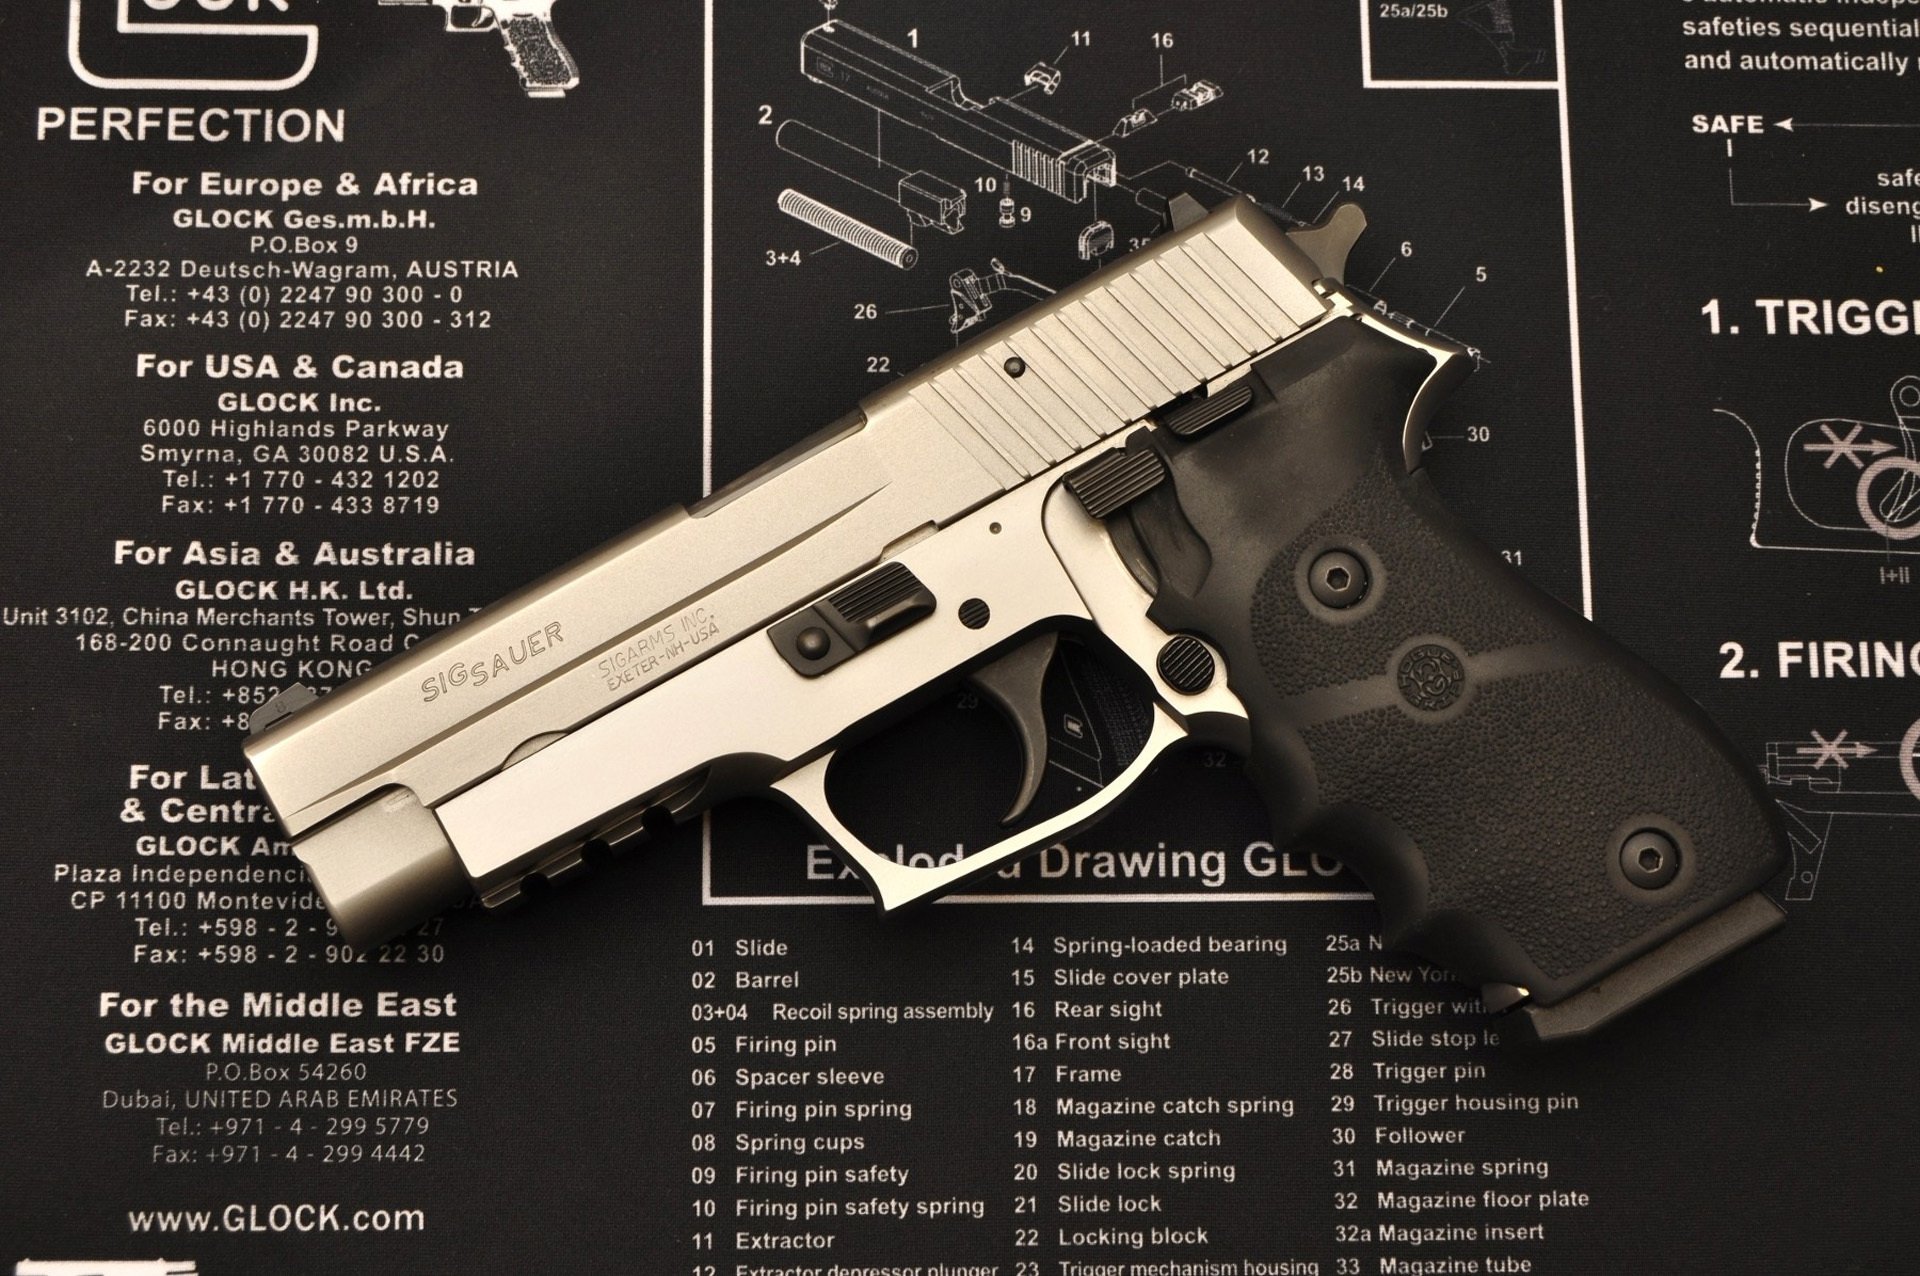 Amazing Sig Sauer Pistol Pictures & Backgrounds